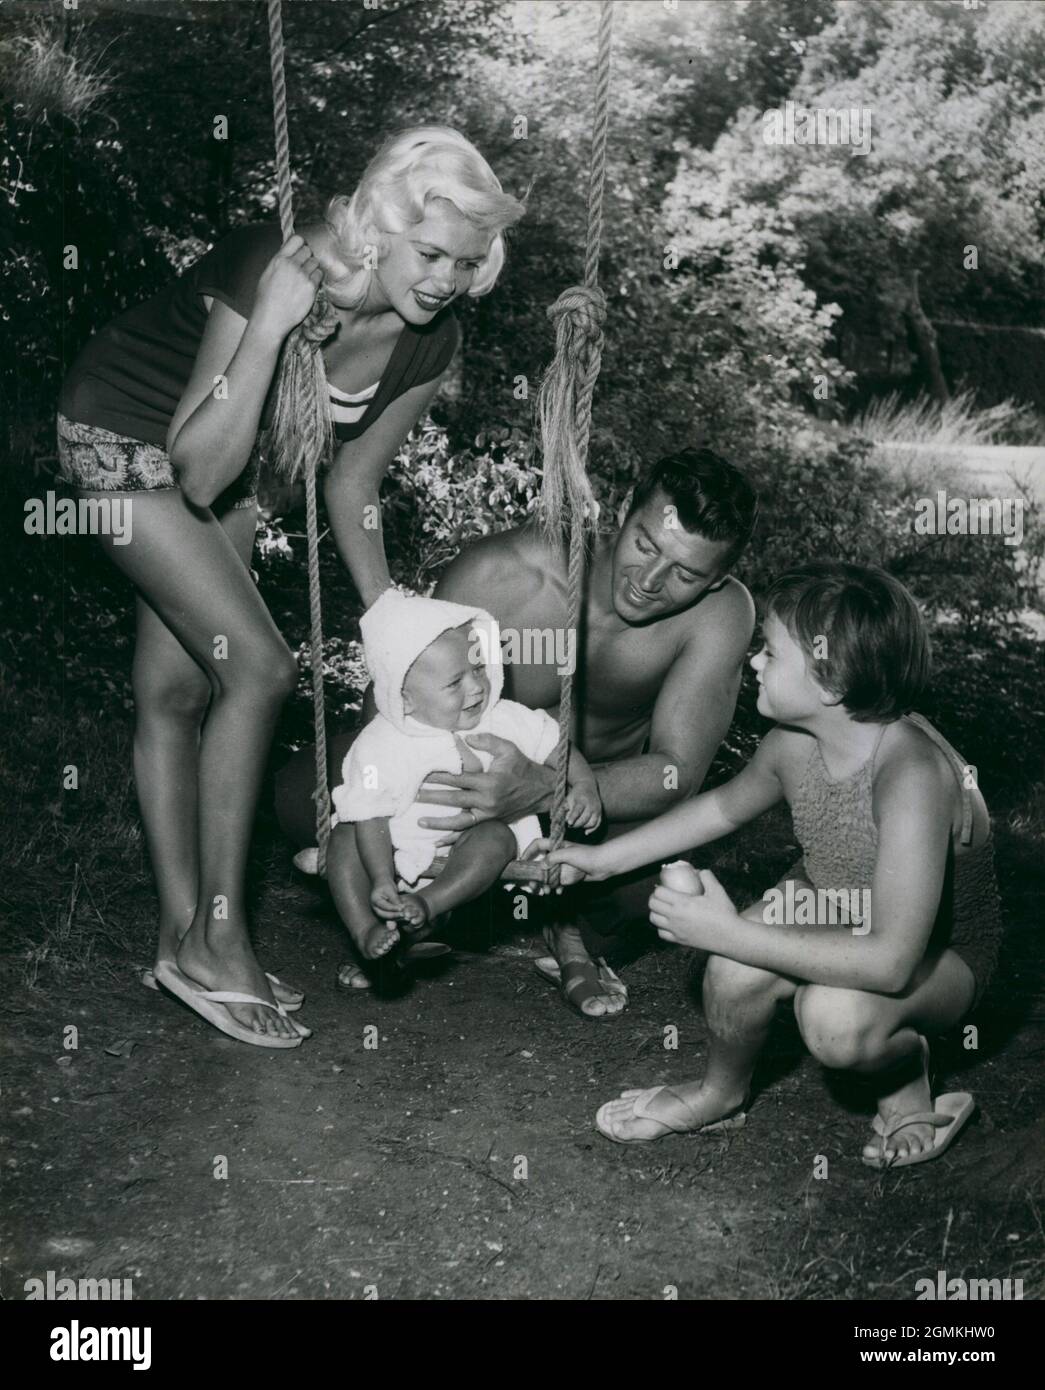 1959 - Garrads Cross, England, United Kingdom - On the swing, Baby MIKLOS HARGITAY gets encouragement from the whole family as he prepares to embark on his first swing. Actor JAYNE MANSFIELD, left, her husband MICKEY HARGITAY, their new arrival, baby Miklos, and Mansfields daughter from her first marriage JAYNE MARIE, right, moved into the 18 the century country home of actor H. Gregg while Mansfield played her part in a film tiled ''Too Hot to Handle'' being made here.  (Credit Image: © Keystone Press Agency/ZUMA Wire) Stock Photo